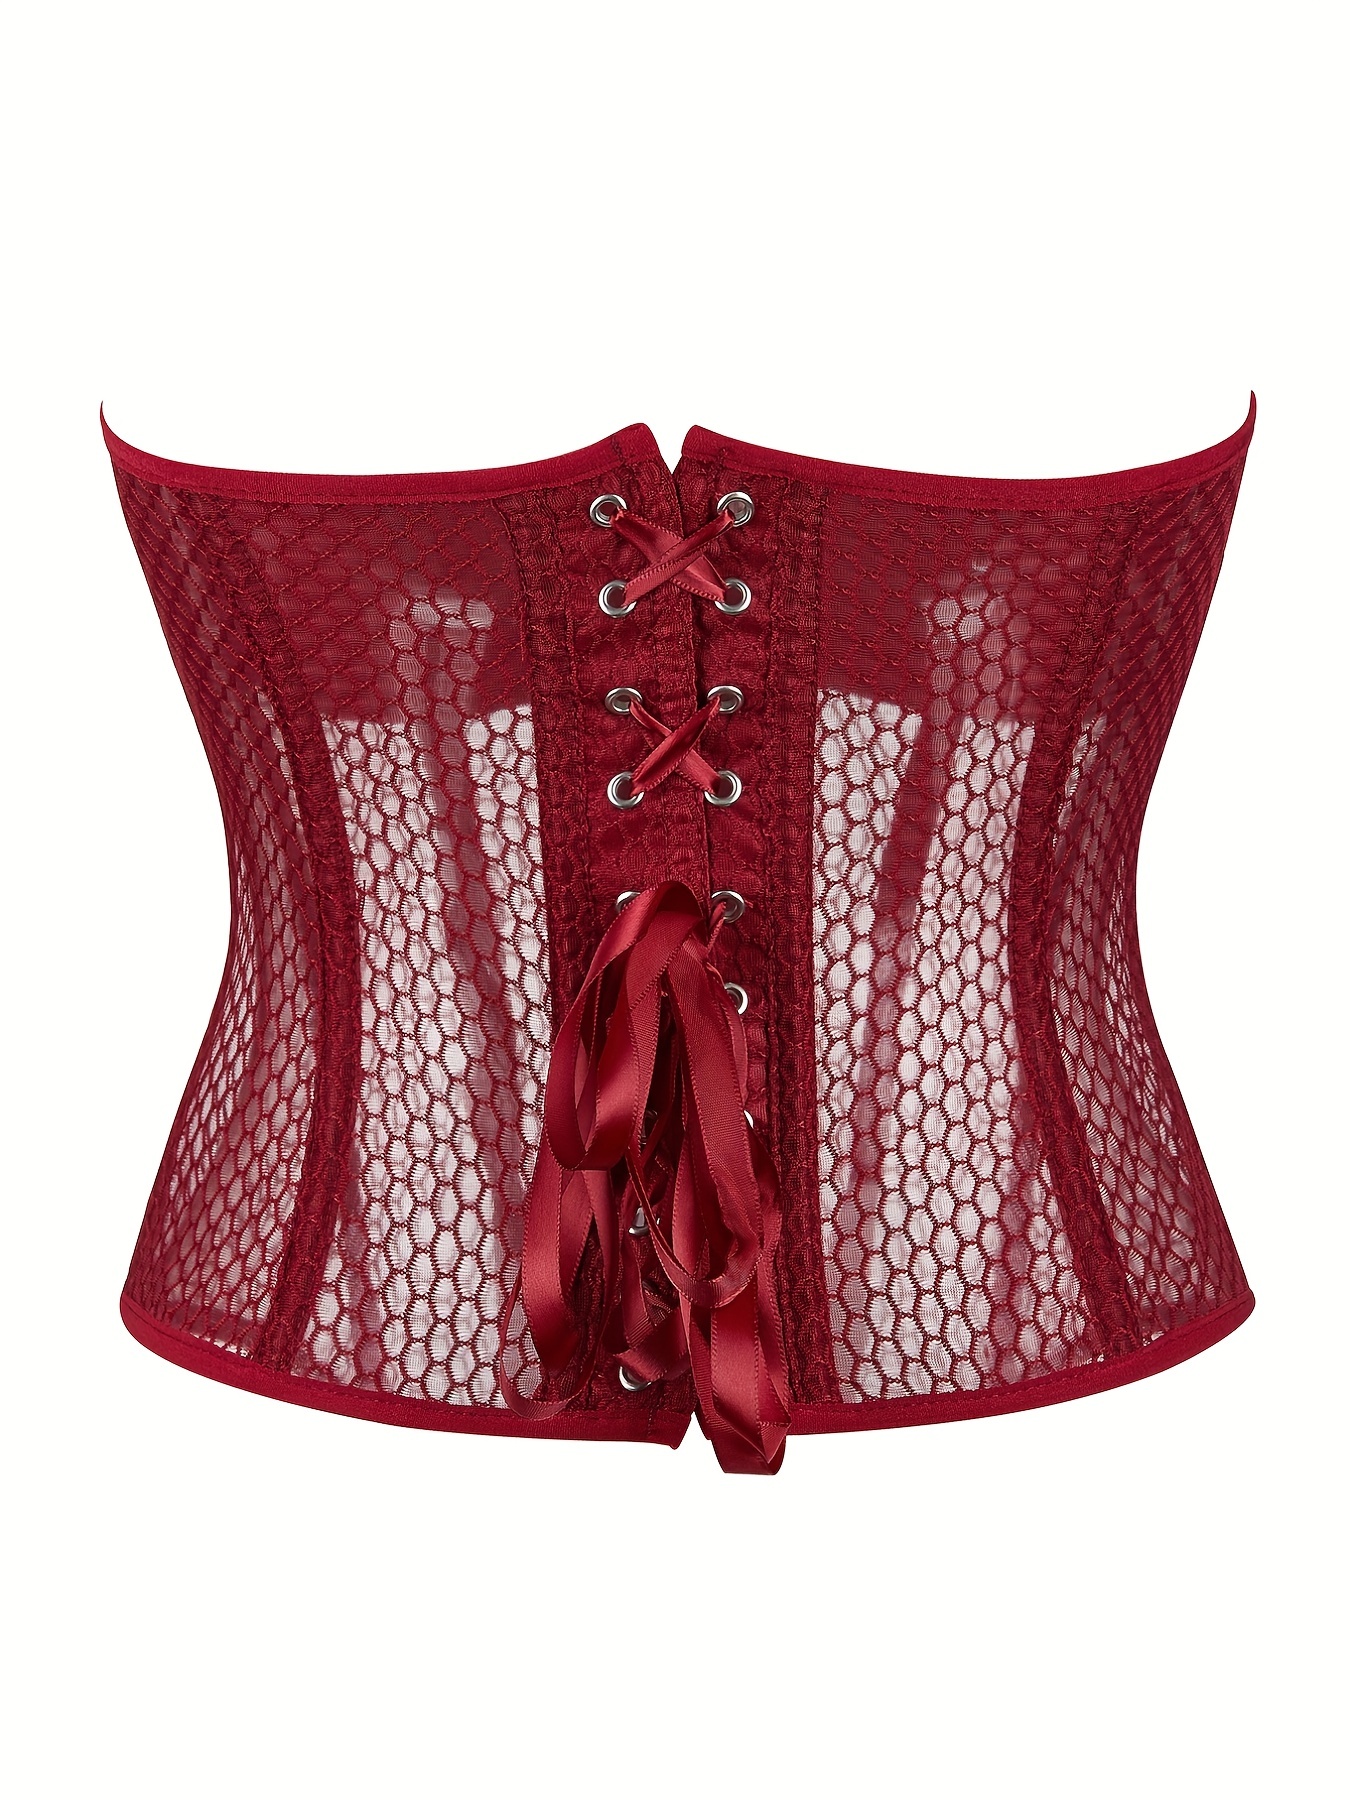 Bombshell Strappy Fishnet Lace Push-Up Corset Top